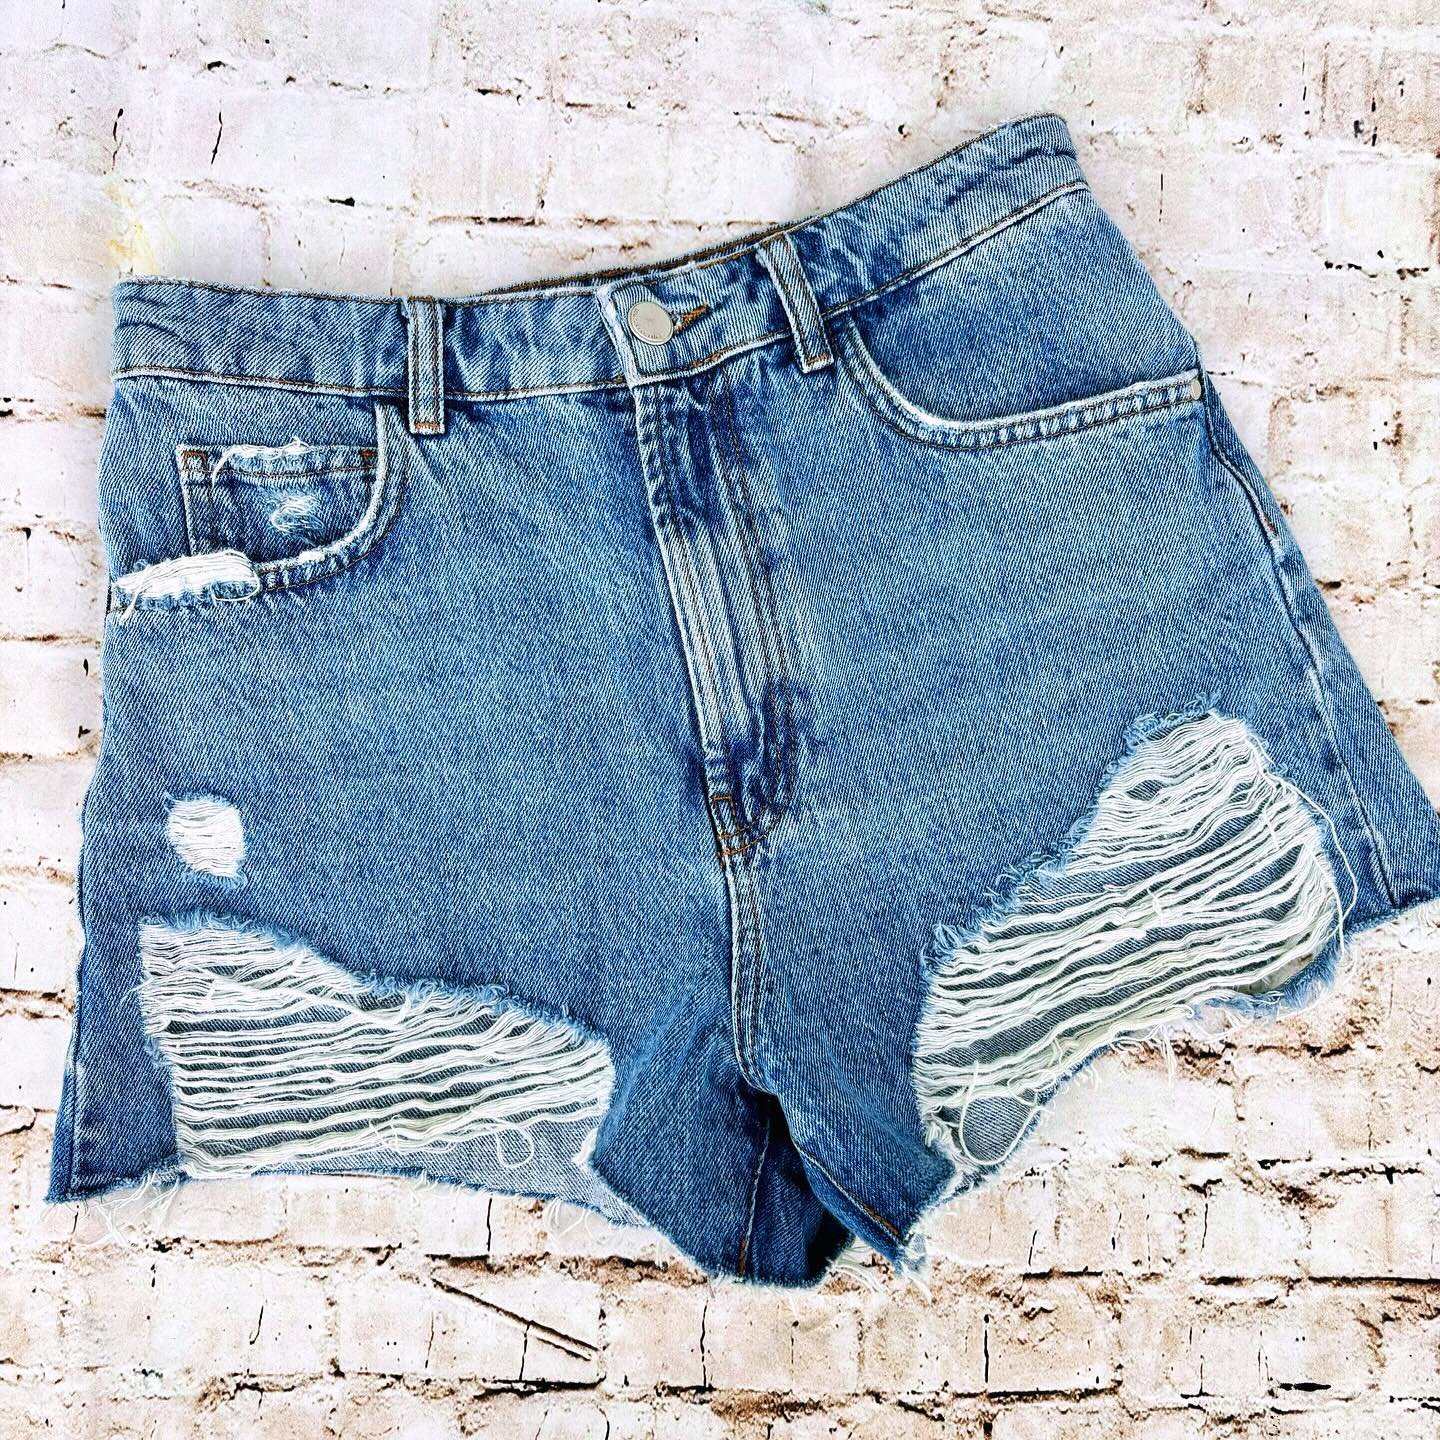 Thrifter POV: Why buy one pair of new Zara cut-off denim shorts, when I can get a pair of thrifted Zara cut-off denim shorts, a woven belt, some trendy sunnies, and a versatile pair of sandals? #iykyk

#thriftproud #thriftshopper #thrifted #thrifthau